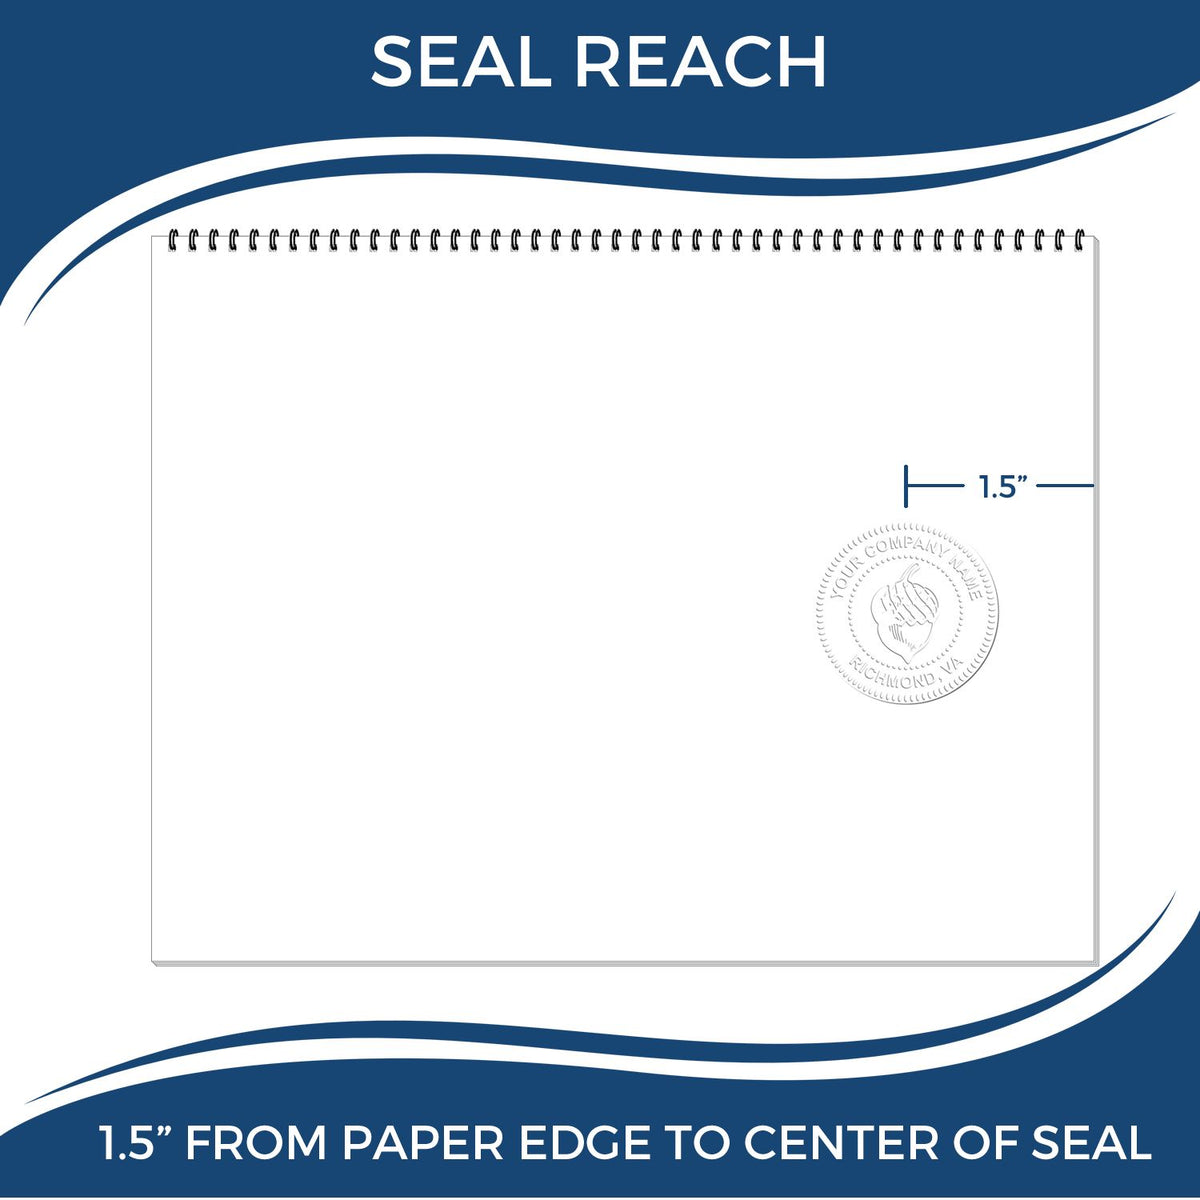 An infographic showing the seal reach which is represented by a ruler and a miniature seal image of the Handheld Alabama Professional Engineer Embosser